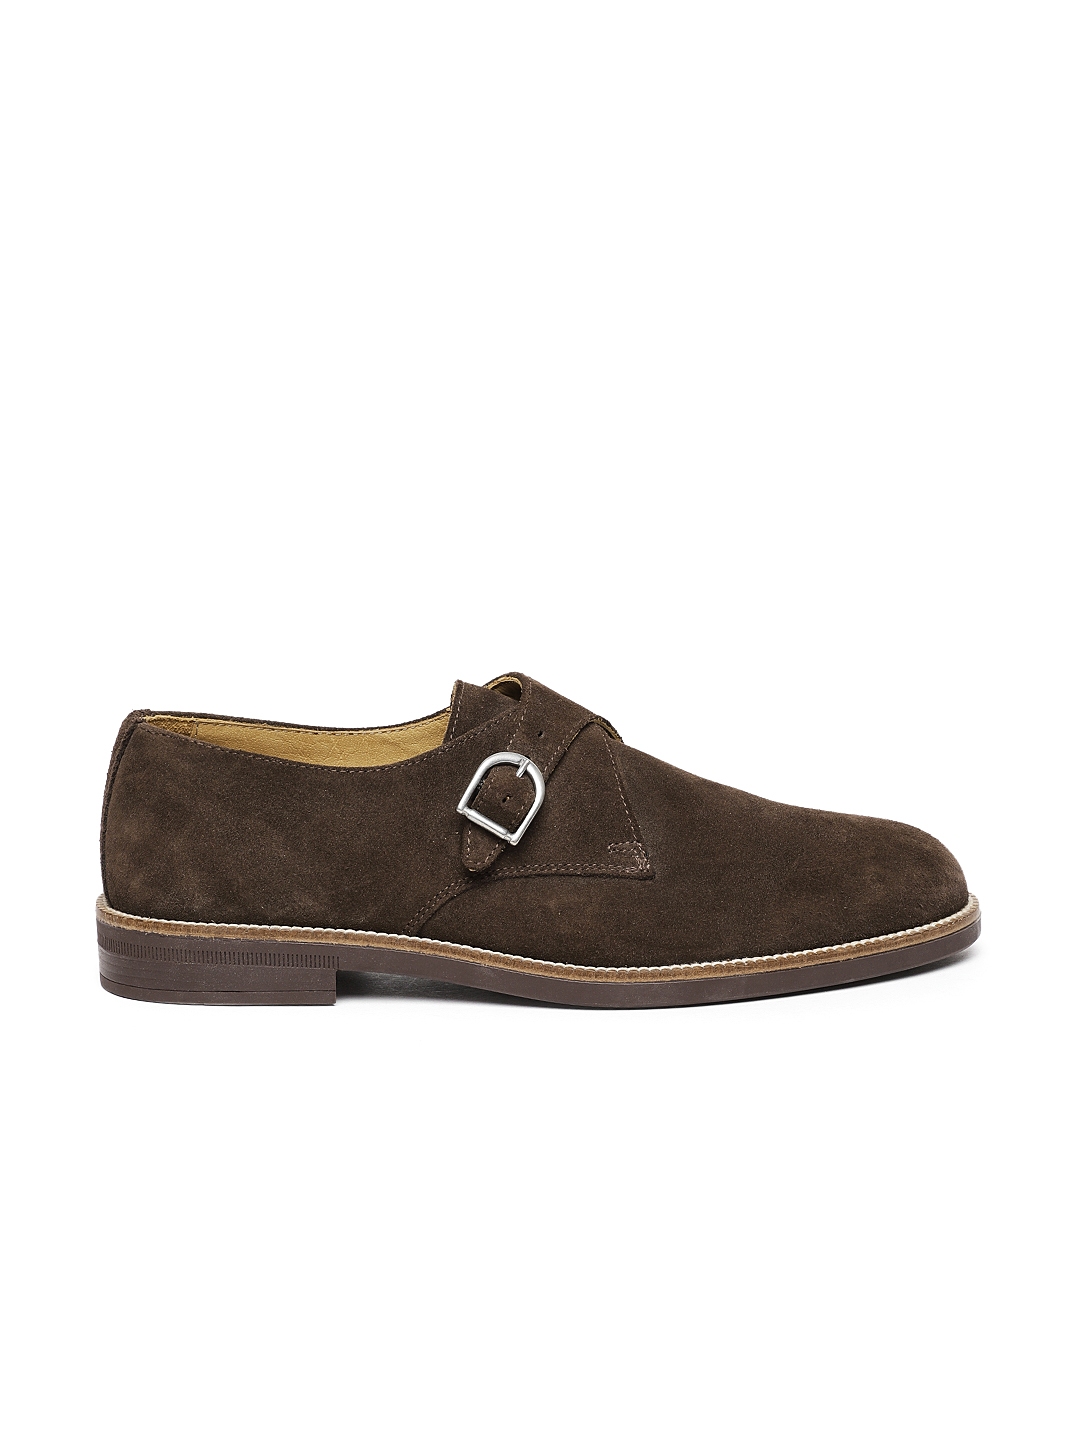 Buy MANGO MAN Men Brown Leather Flat Boots - Boots for Men 2267087 | Myntra